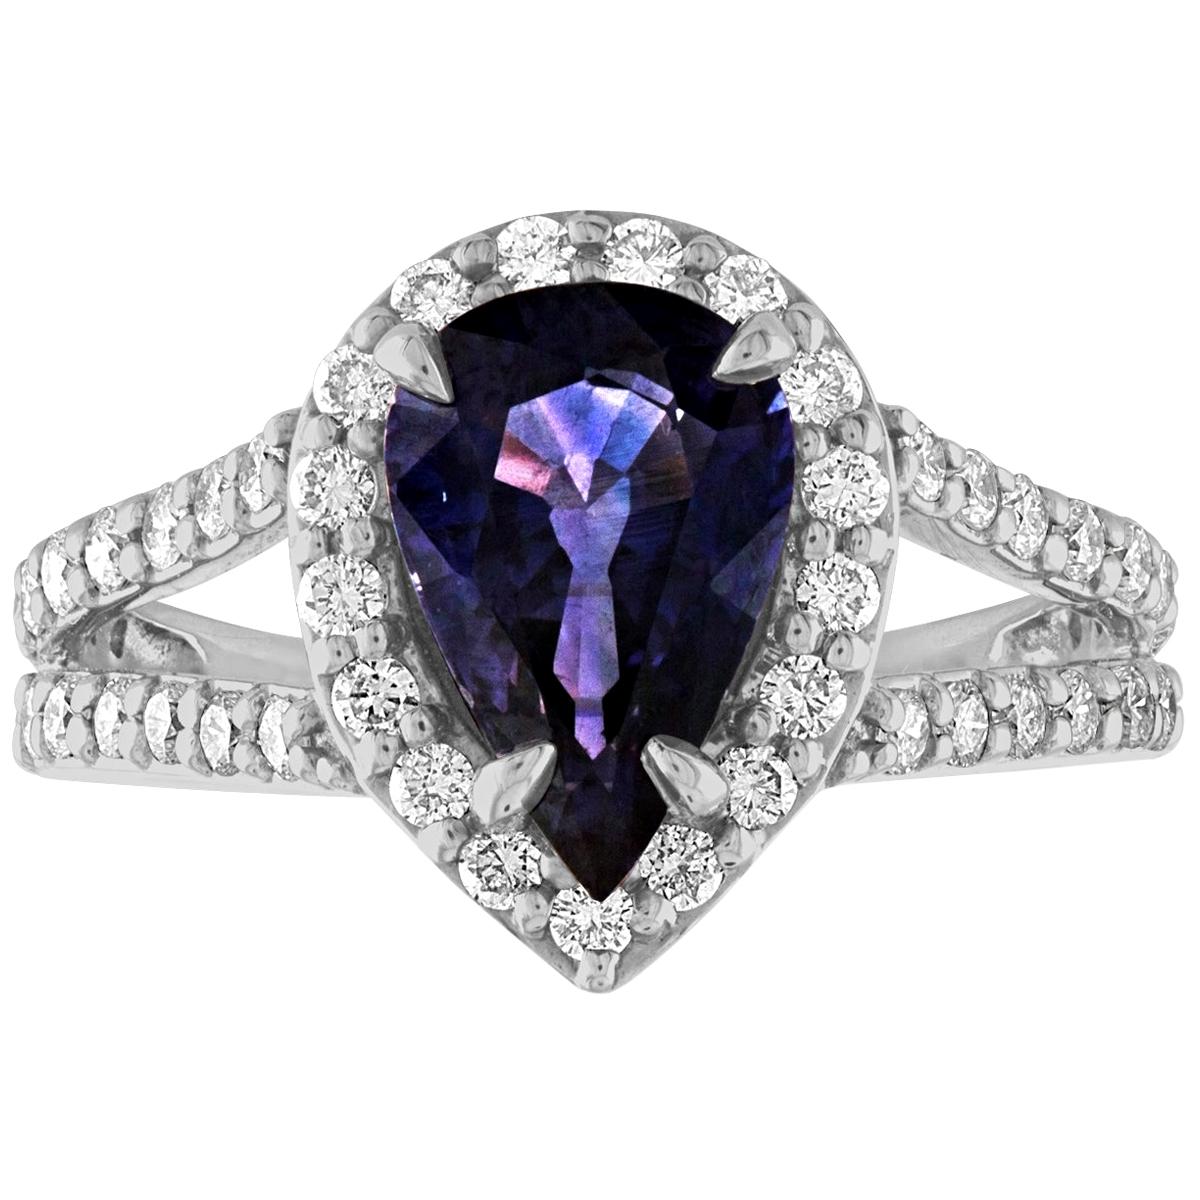 Certified 2.56 Carat Pear Violet Blue Sapphire Diamond Halo Gold Ring